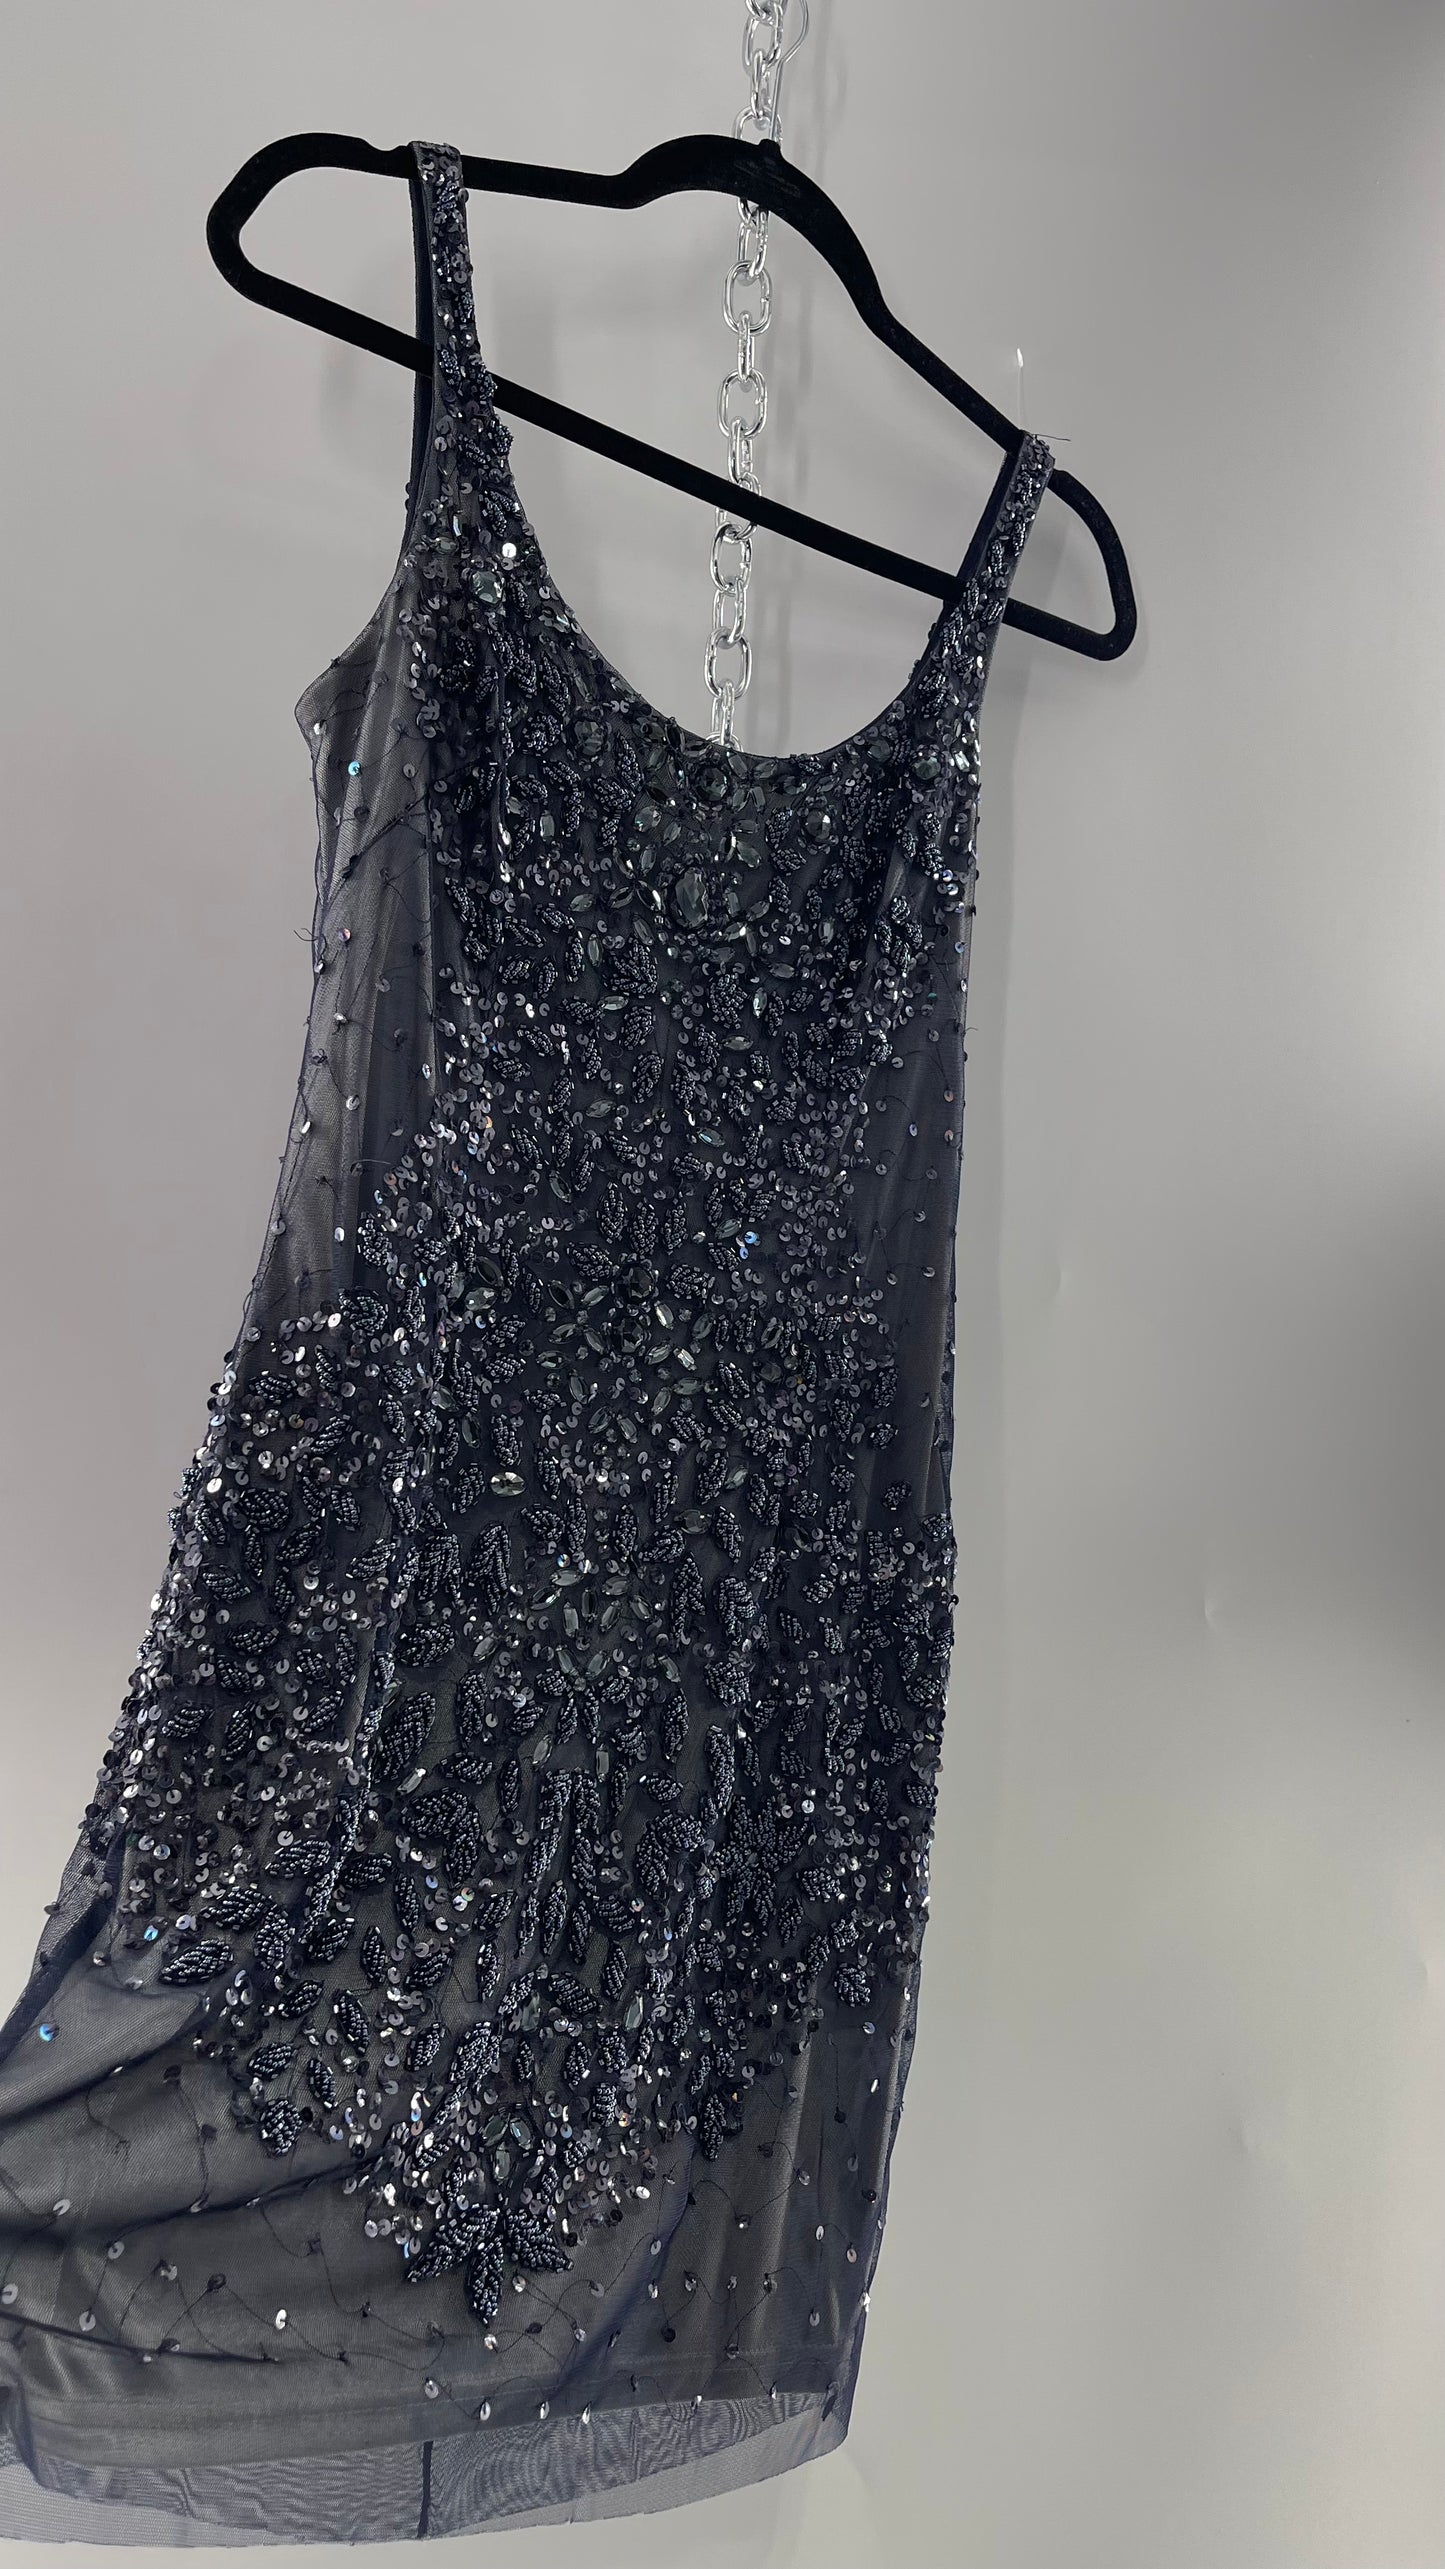 Vintage Cache Moonlight Grey/Navy Blue Tunic Mini Dress with Accentuating Placement of Beads, Sequins and Embroidery Details (2)